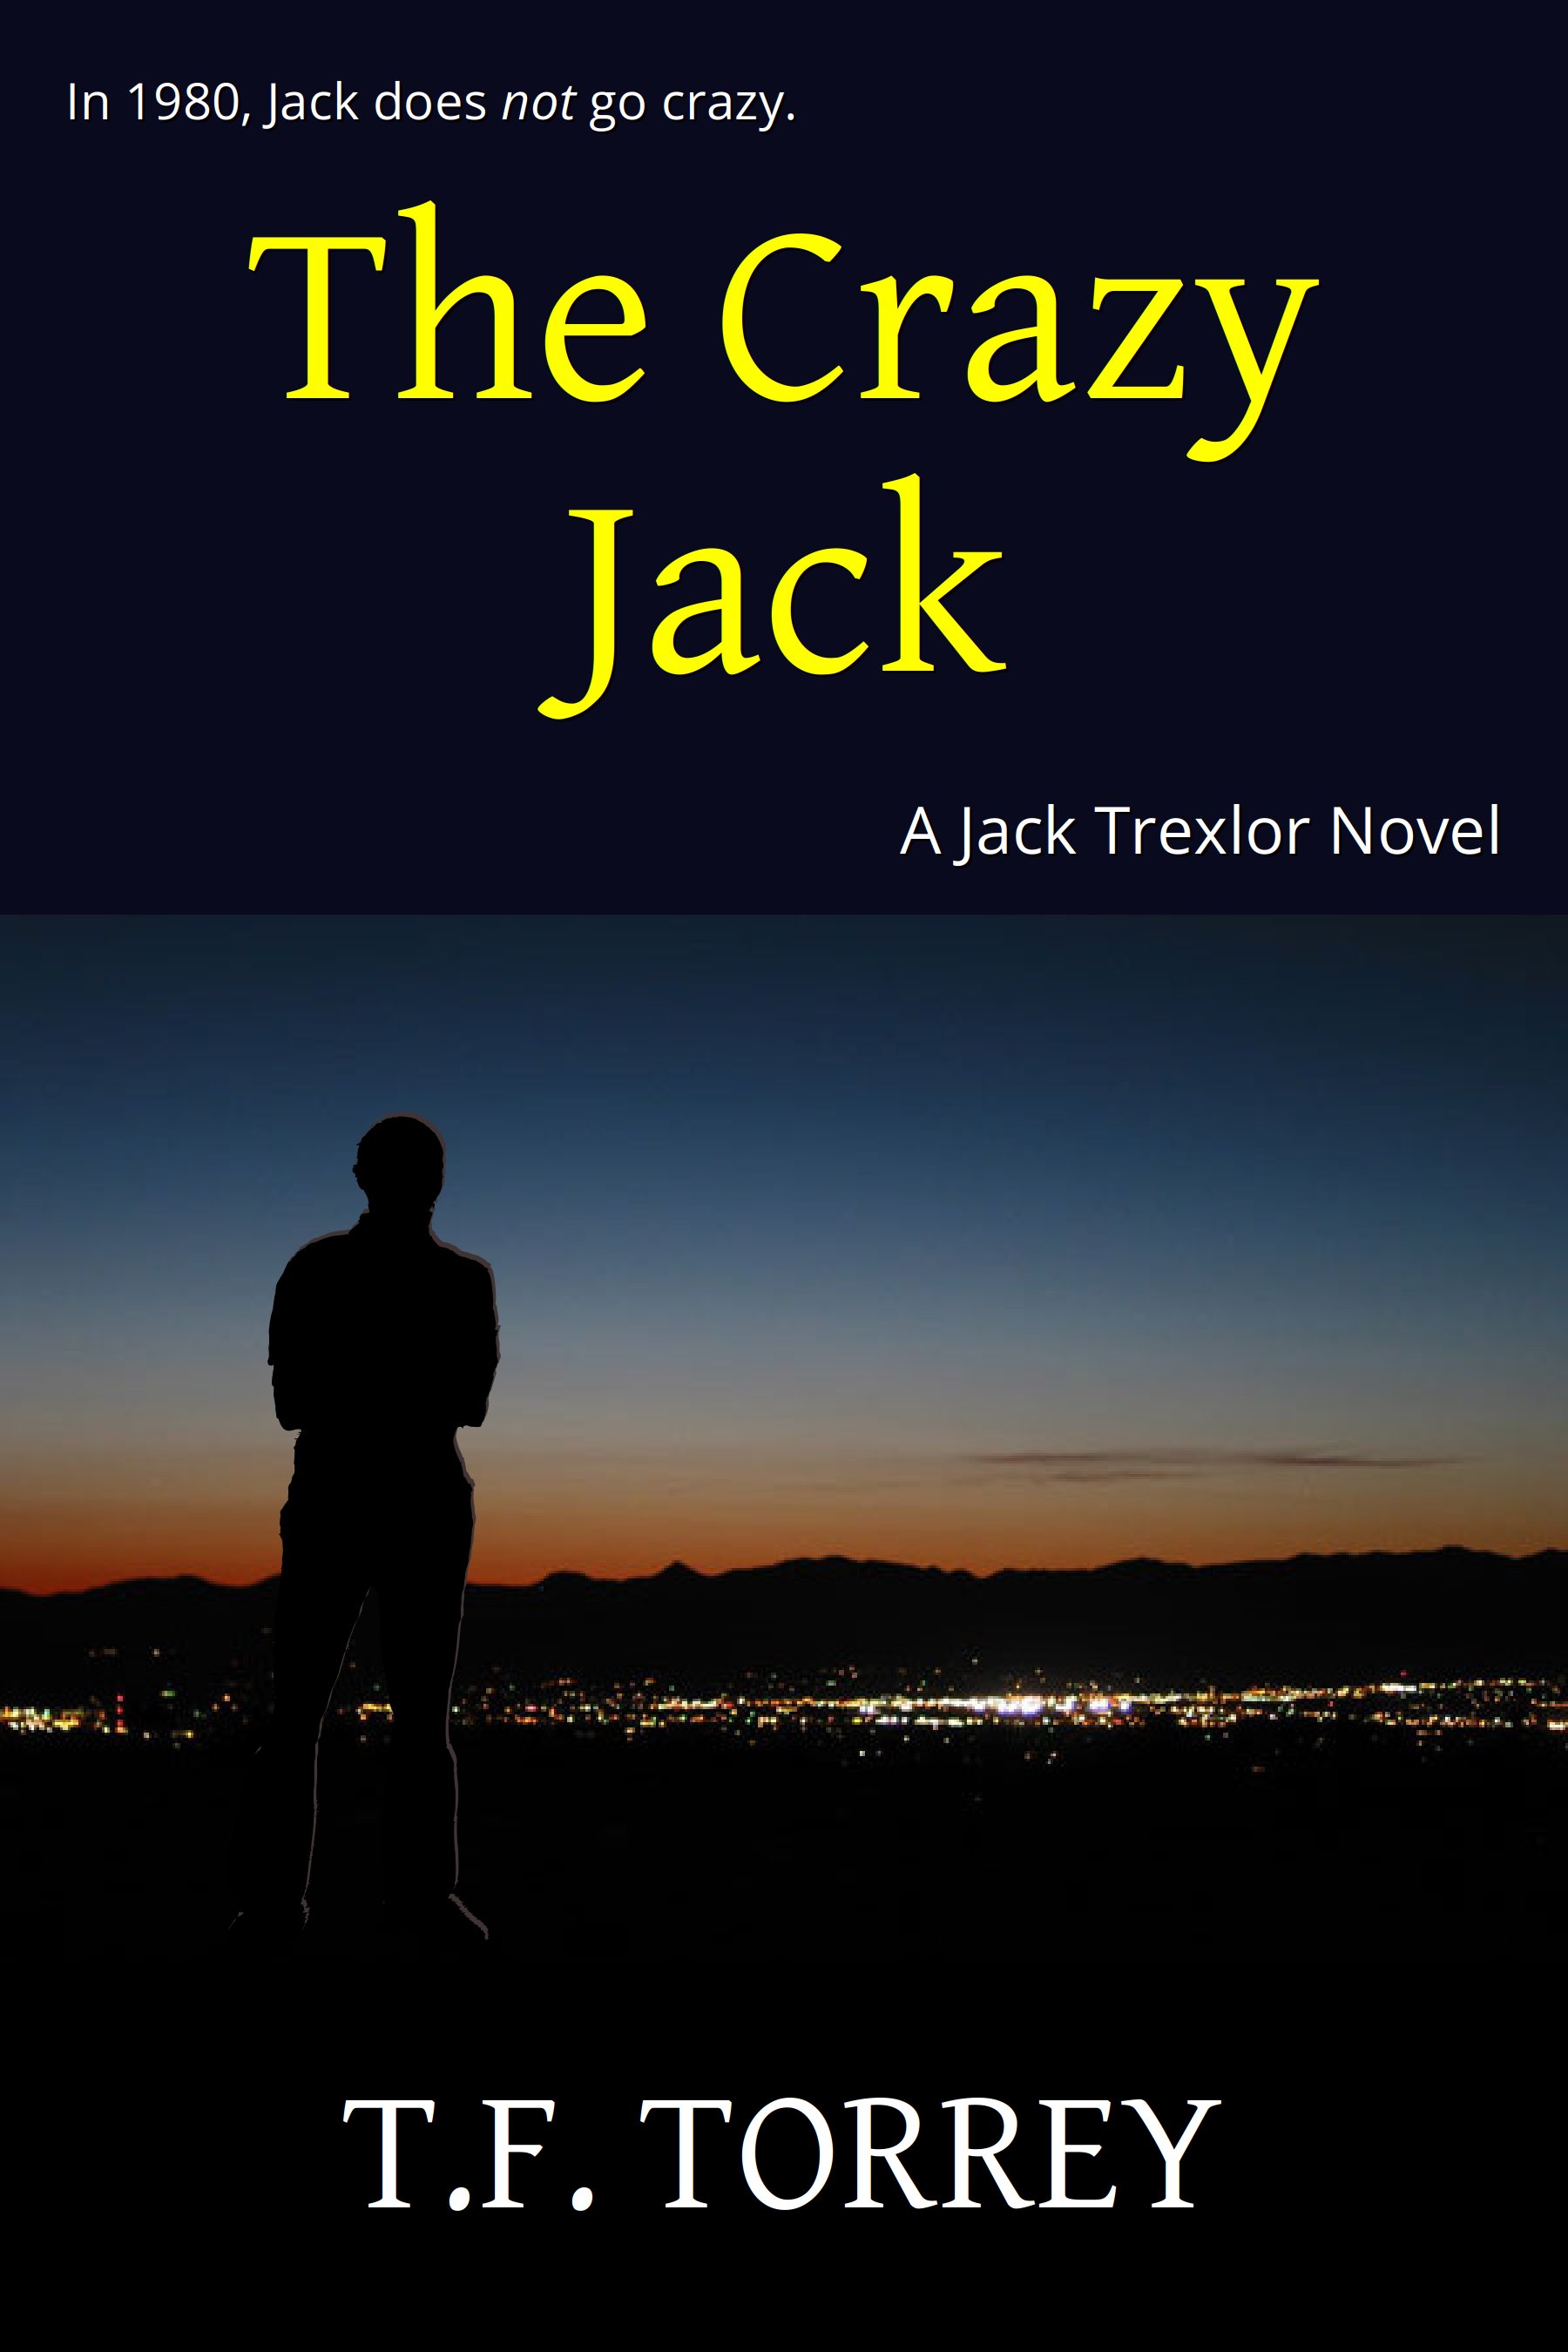 Cover of The Crazy Jack: A Jack Trexlor Novel by T.F. Torrey